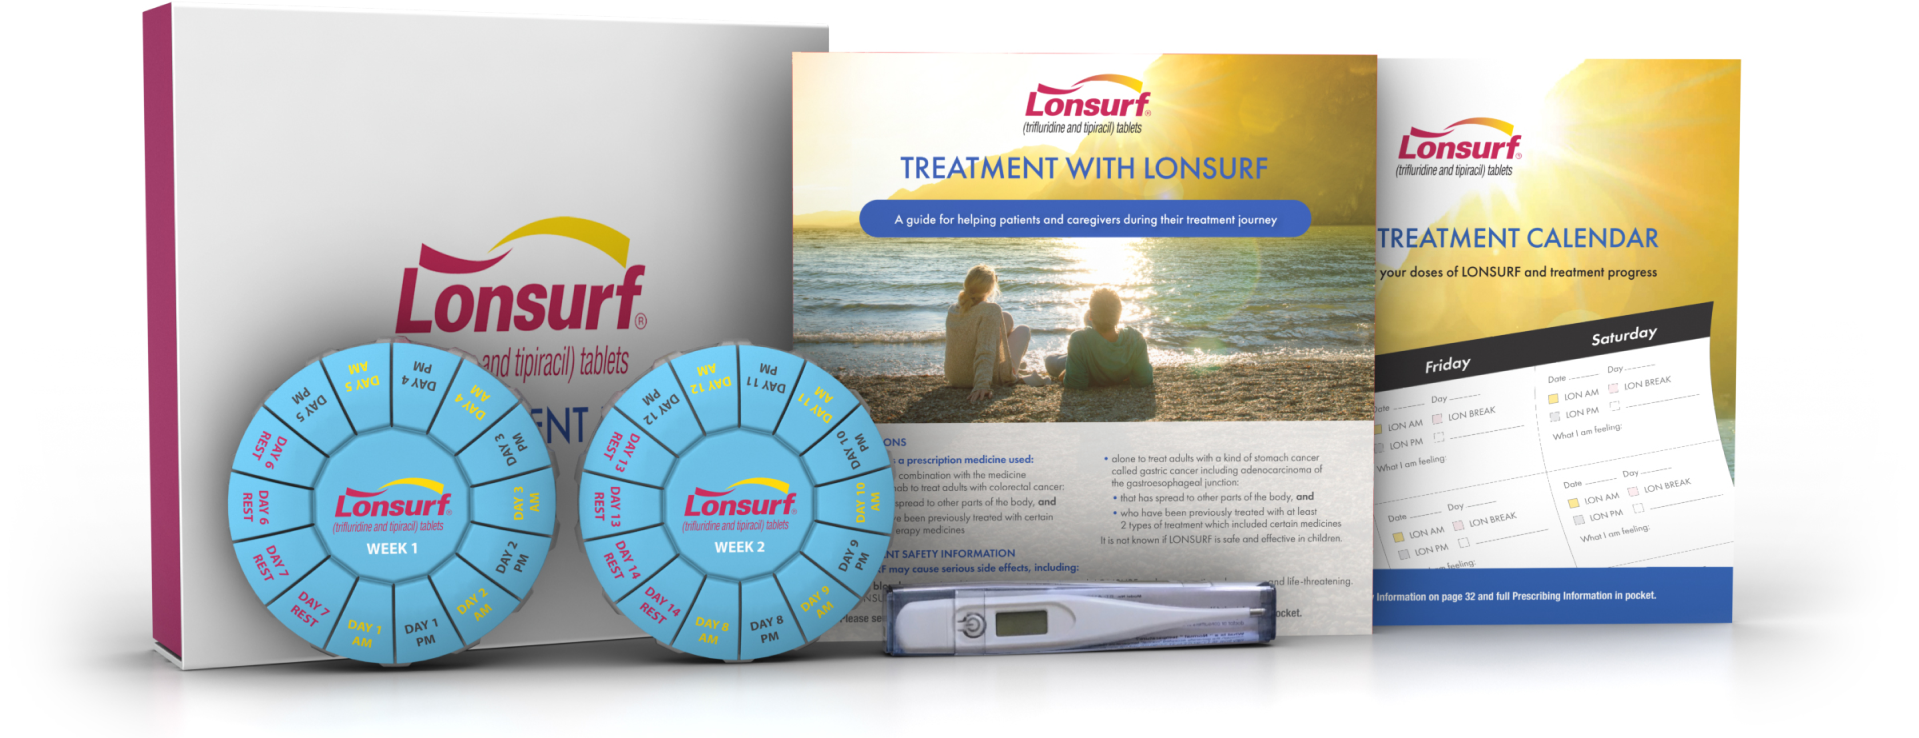 The LONSURF Patient Treatment Kit includes a patient and caregiver brochure, LONSURF treatment calendar, pill organizers, and a thermometer.